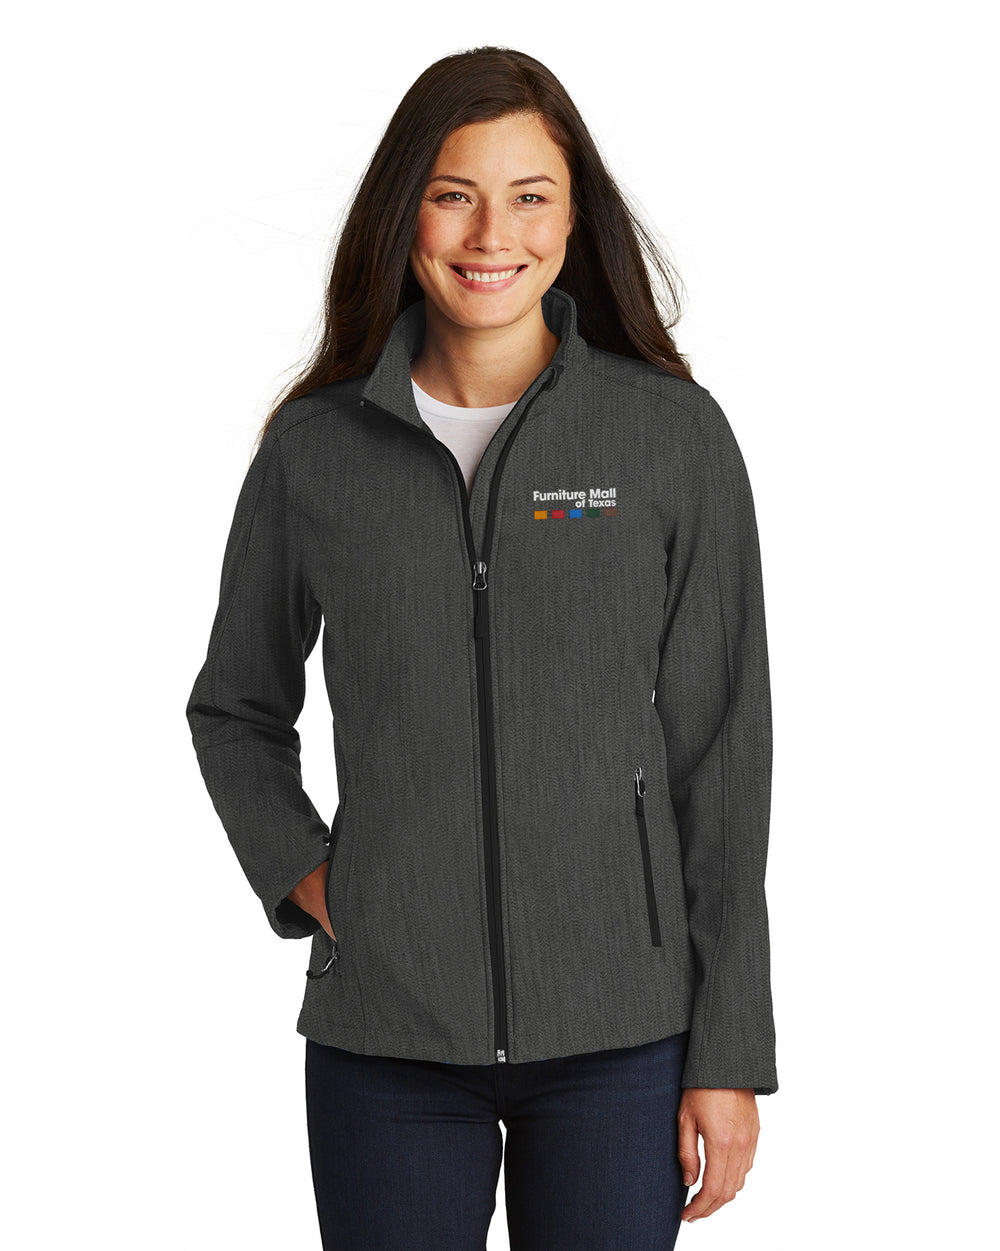 Furniture Mall of Texas - Port Authority Ladies Core Soft Shell Jacket - L317